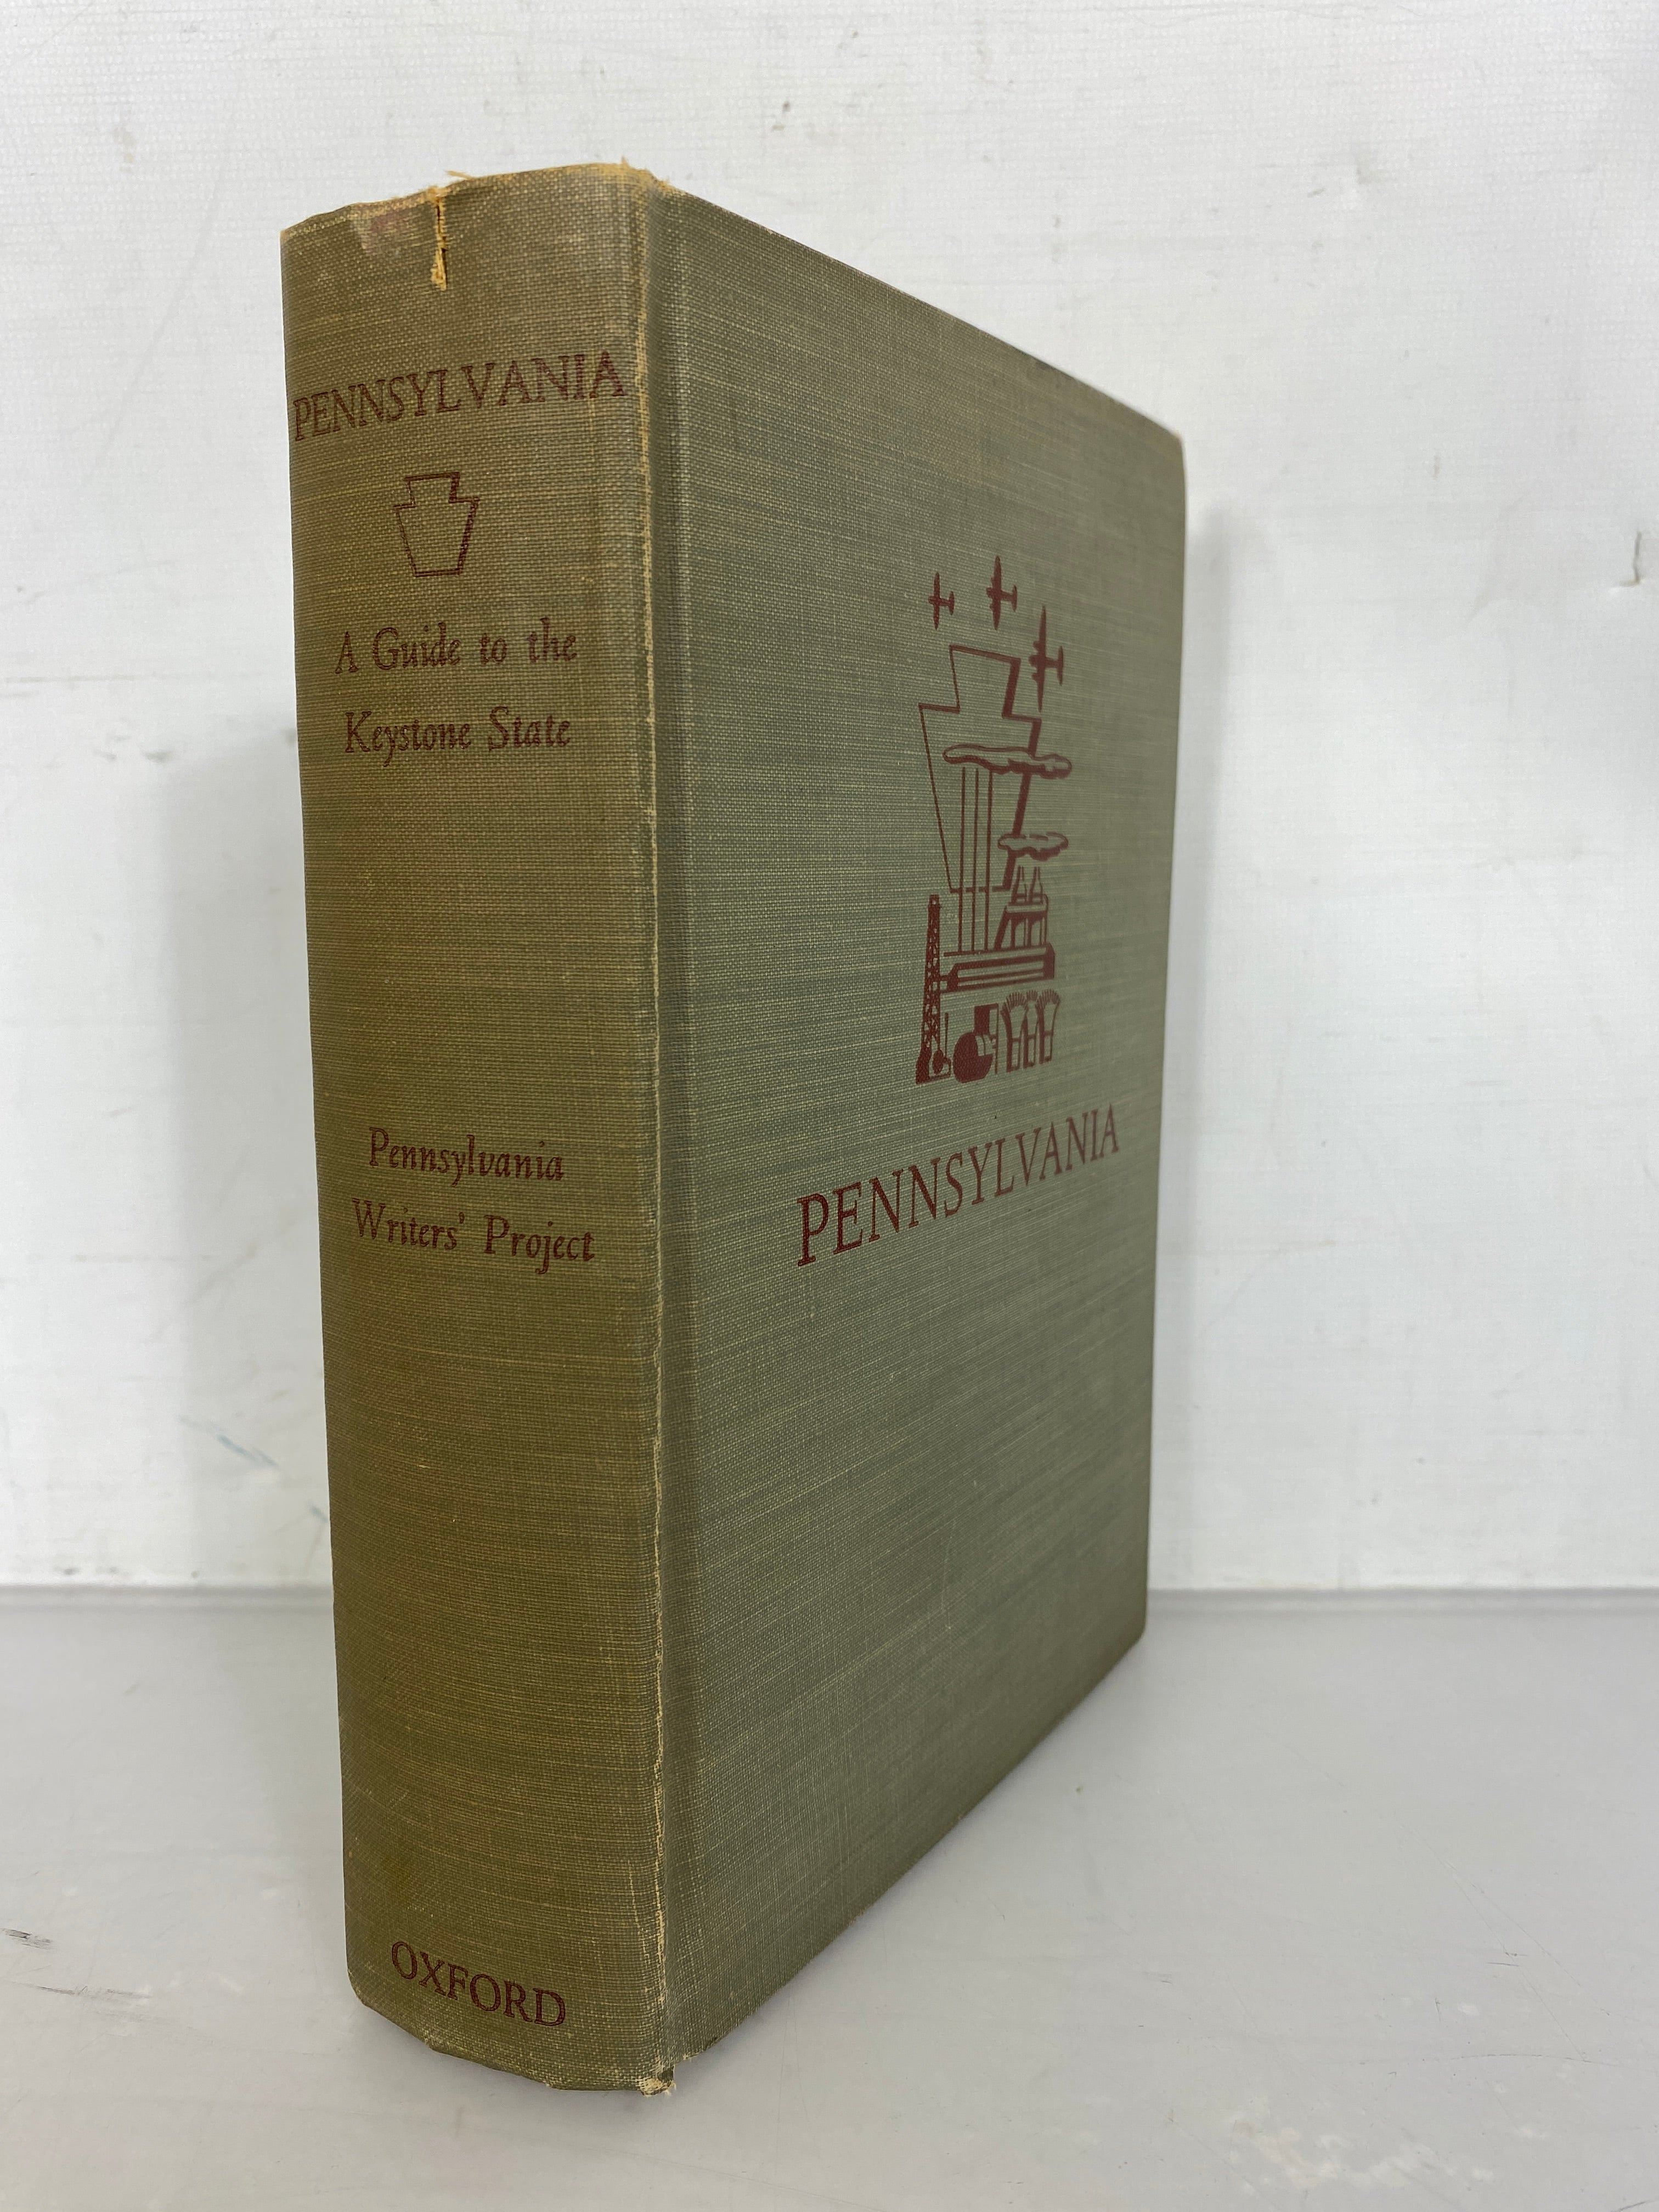 Pennsylvania A Guide to the Keystone State With Map 1940 Works Projects Administration HC